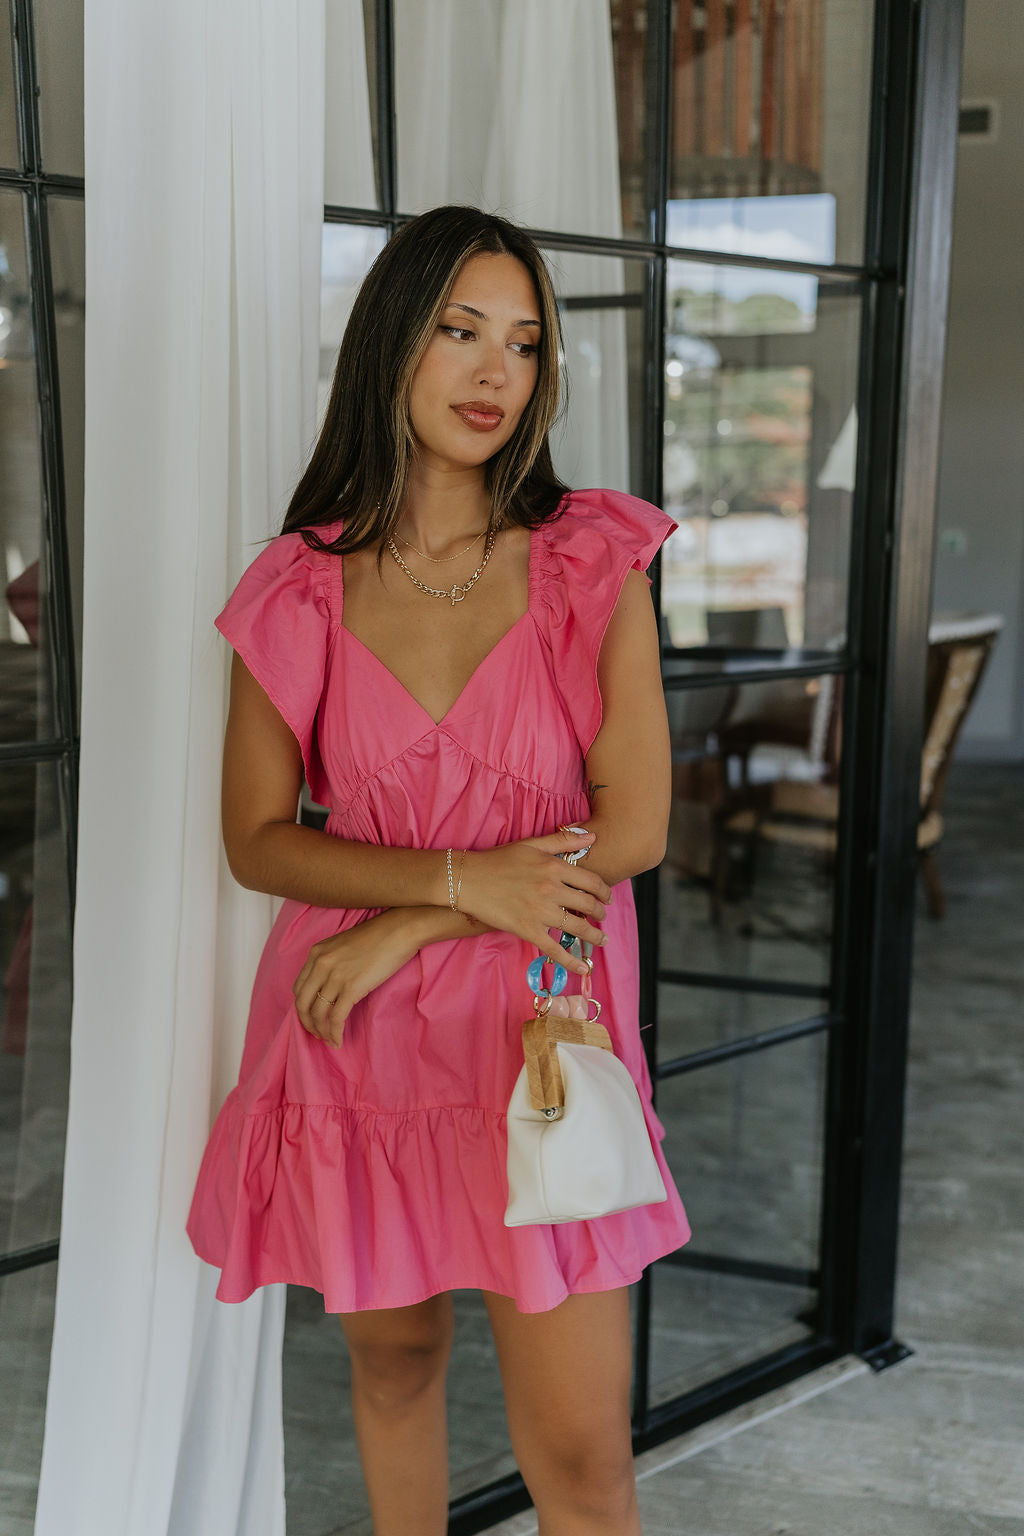 Front view of female model wearing the Alani Pink Ruffle Mini Dress which features Pink Lightweight Fabric, Mini Length, Ruffle Hem, Plunge Neckline and Ruffle Straps